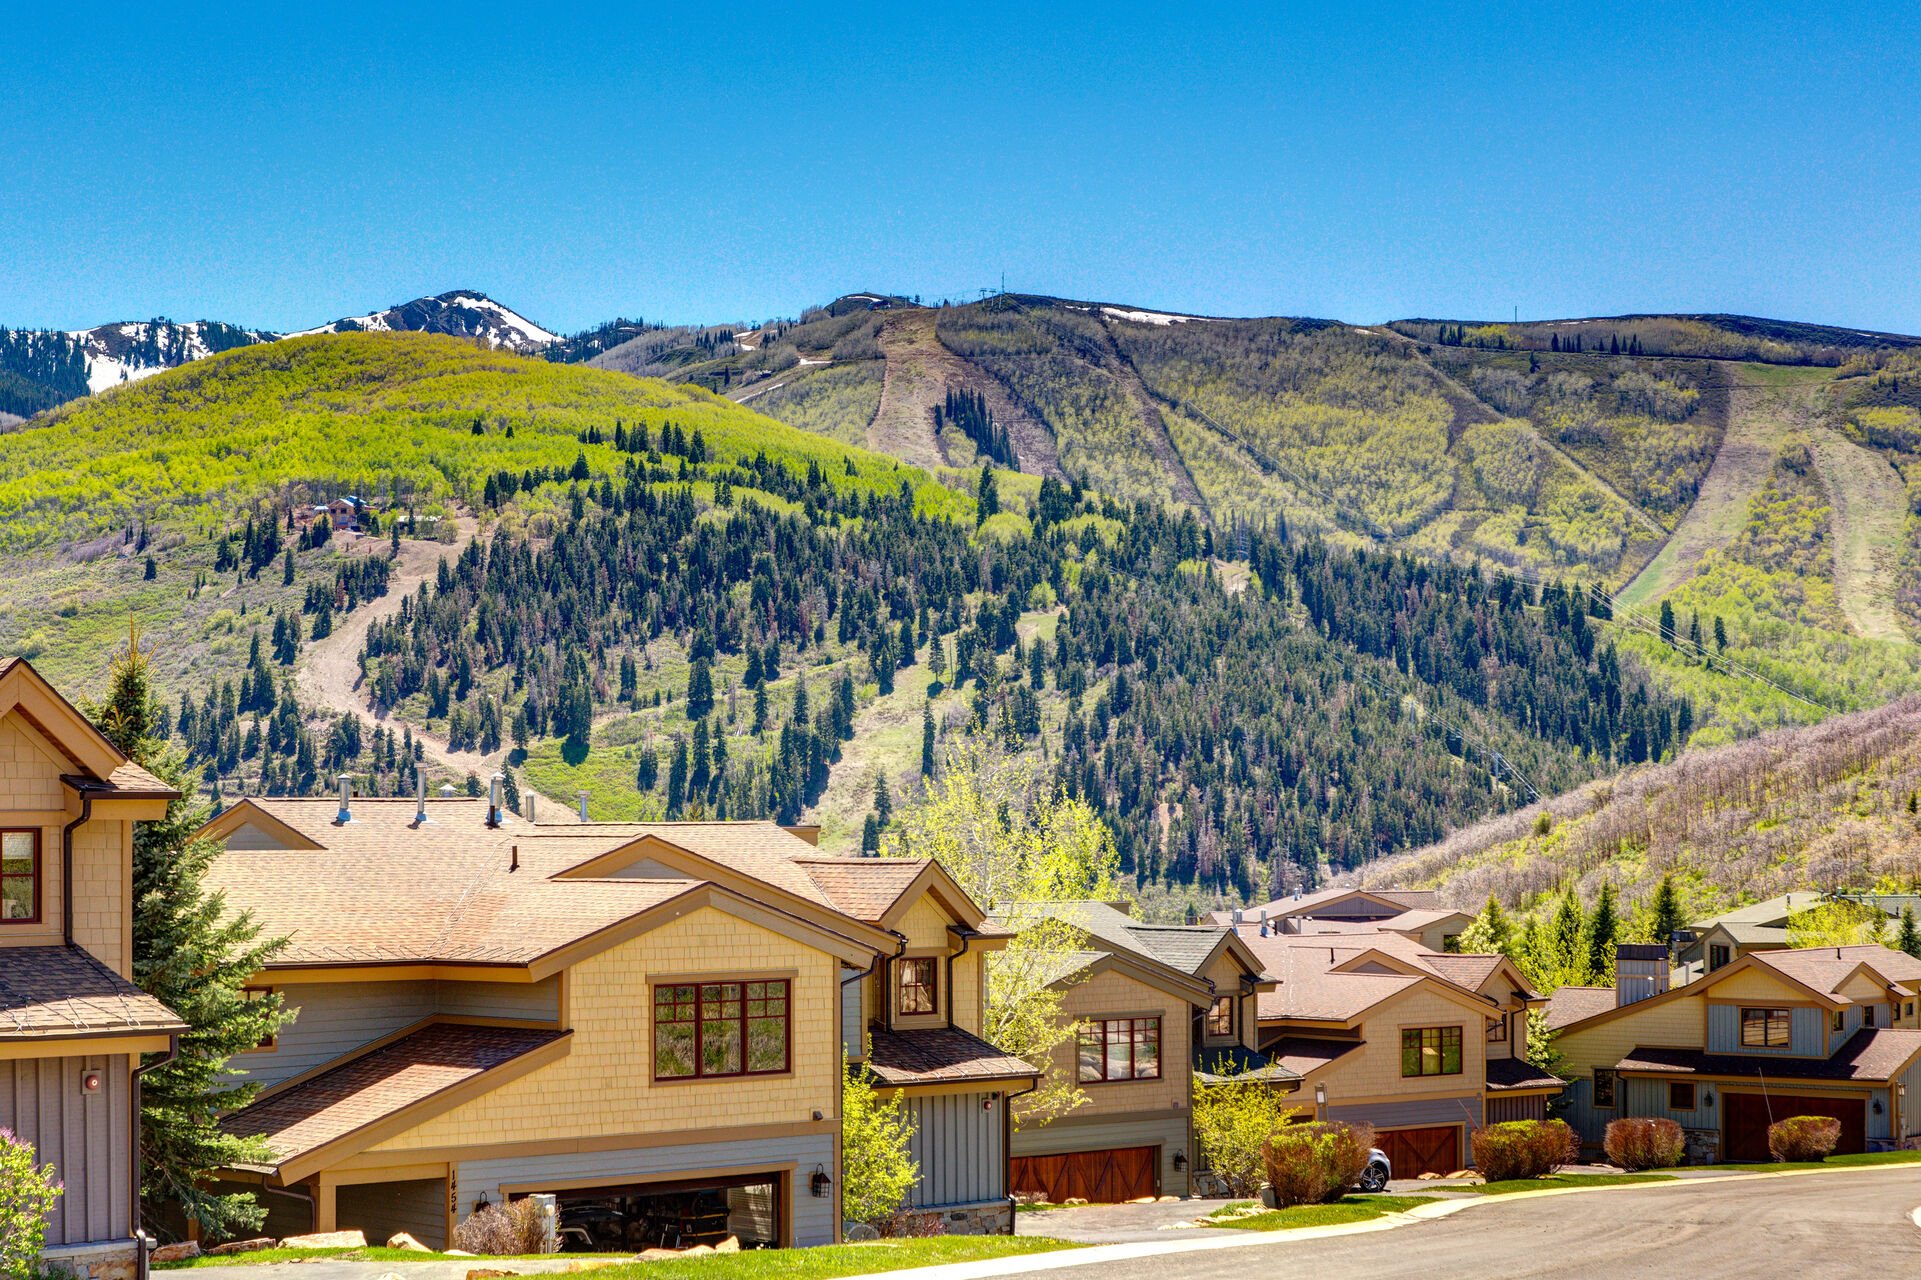 Property is Located on April Mountain - Views of Park City Mountain Resort